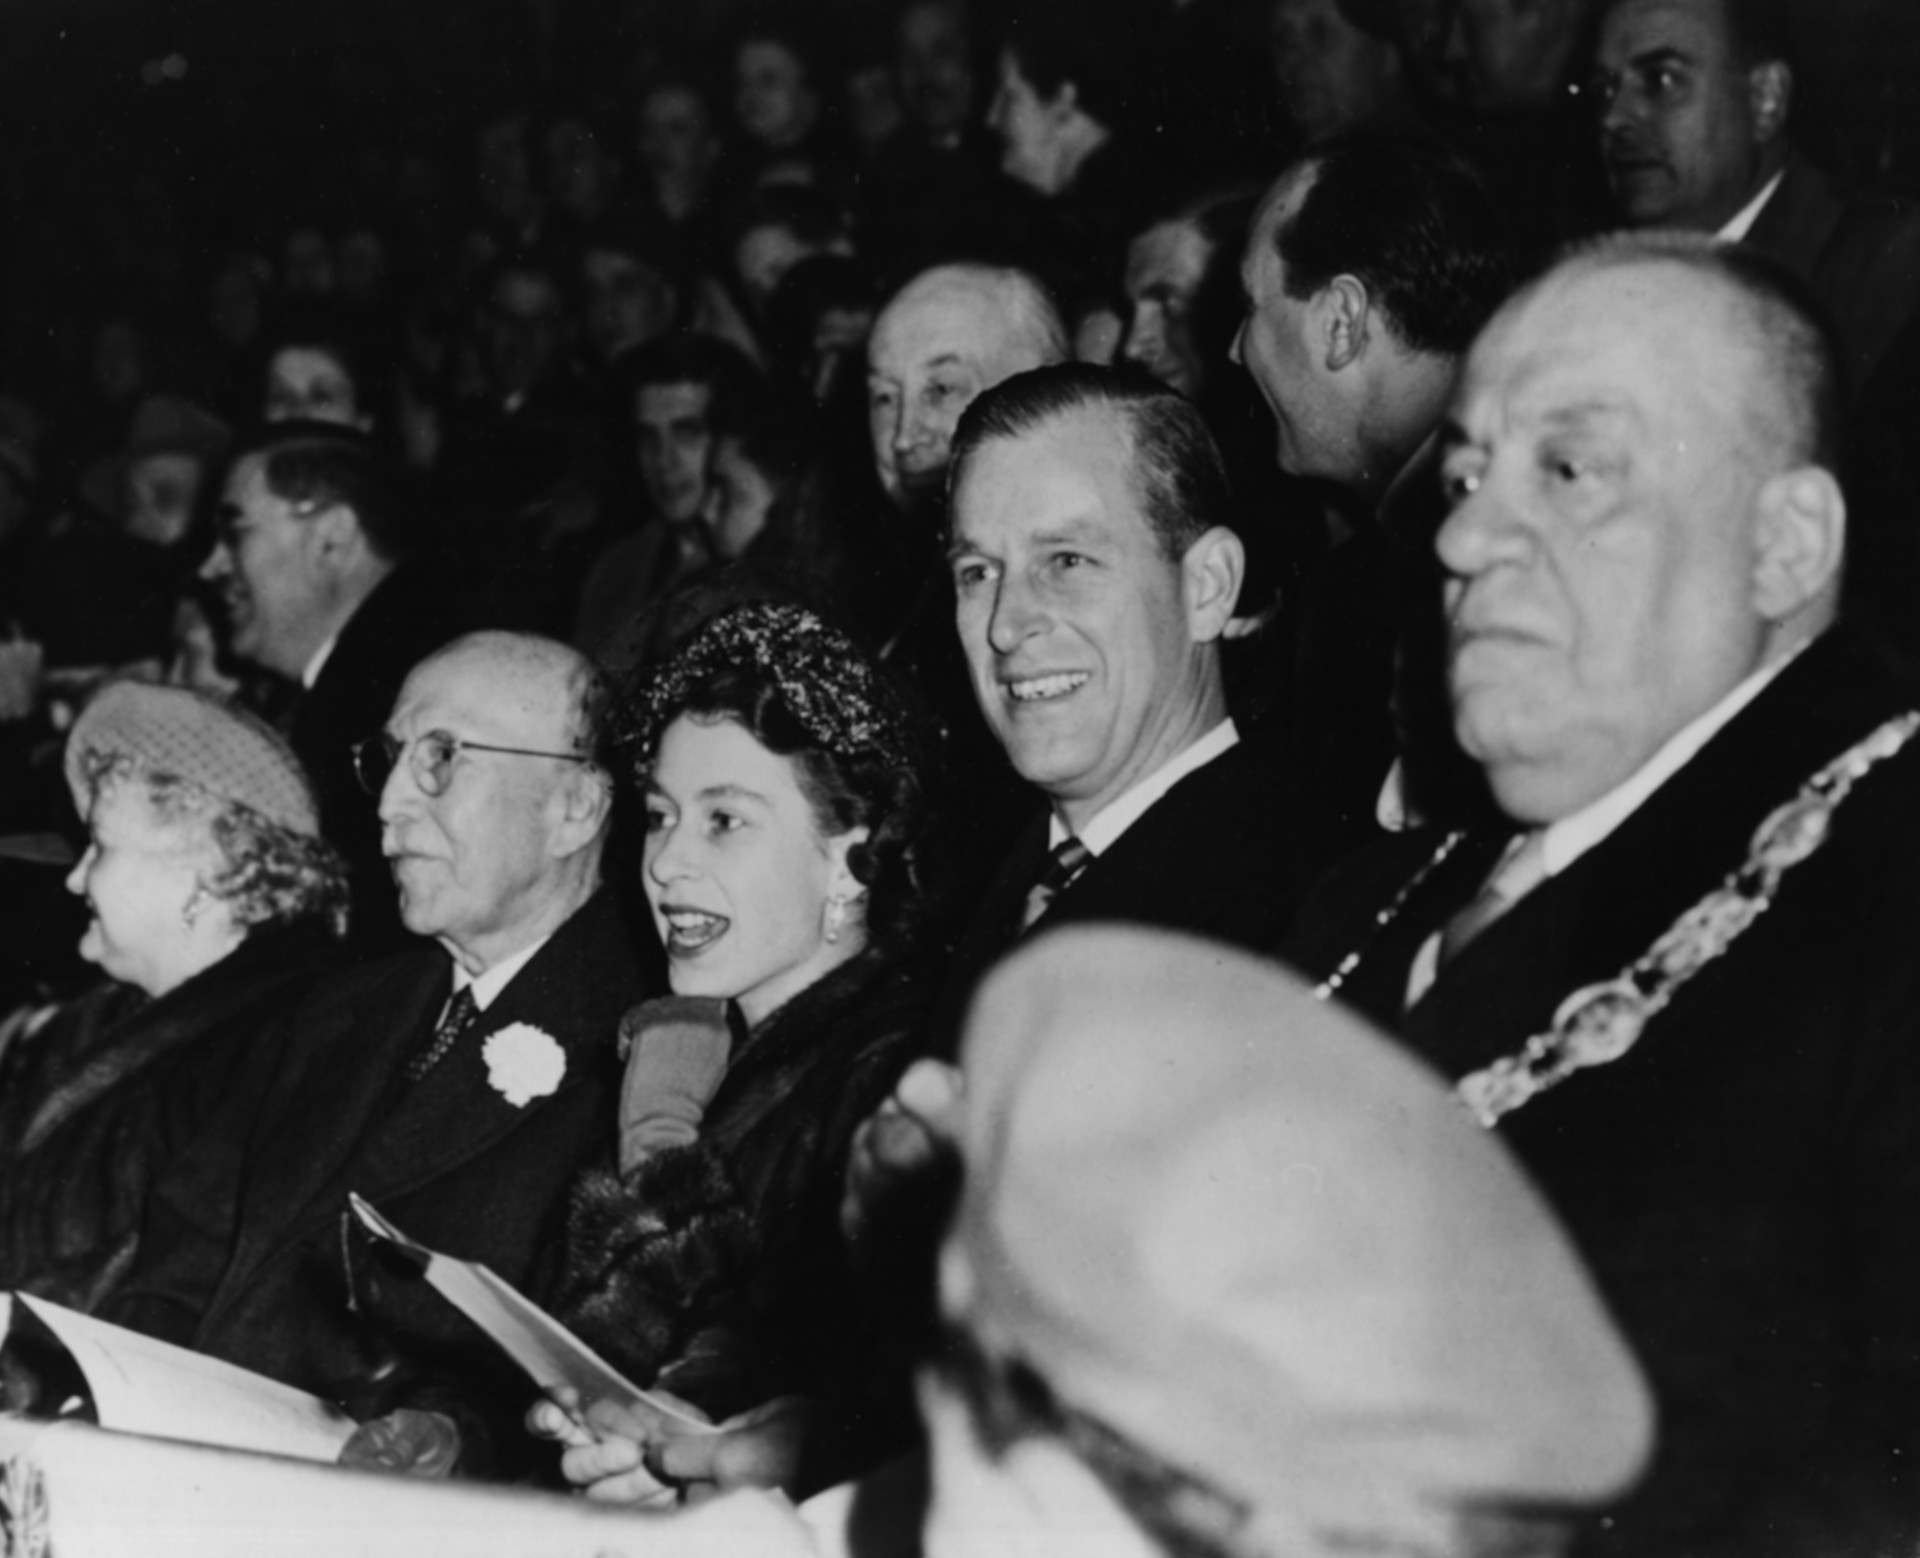 Princess Elizabeth and Prince Philip clearly engrossed in an ice hockey game in Montreal.<p><a href="https://www.msn.com/en-au/community/channel/vid-7xx8mnucu55yw63we9va2gwr7uihbxwc68fxqp25x6tg4ftibpra?cvid=94631541bc0f4f89bfd59158d696ad7e">Follow us and access great exclusive content every day</a></p>